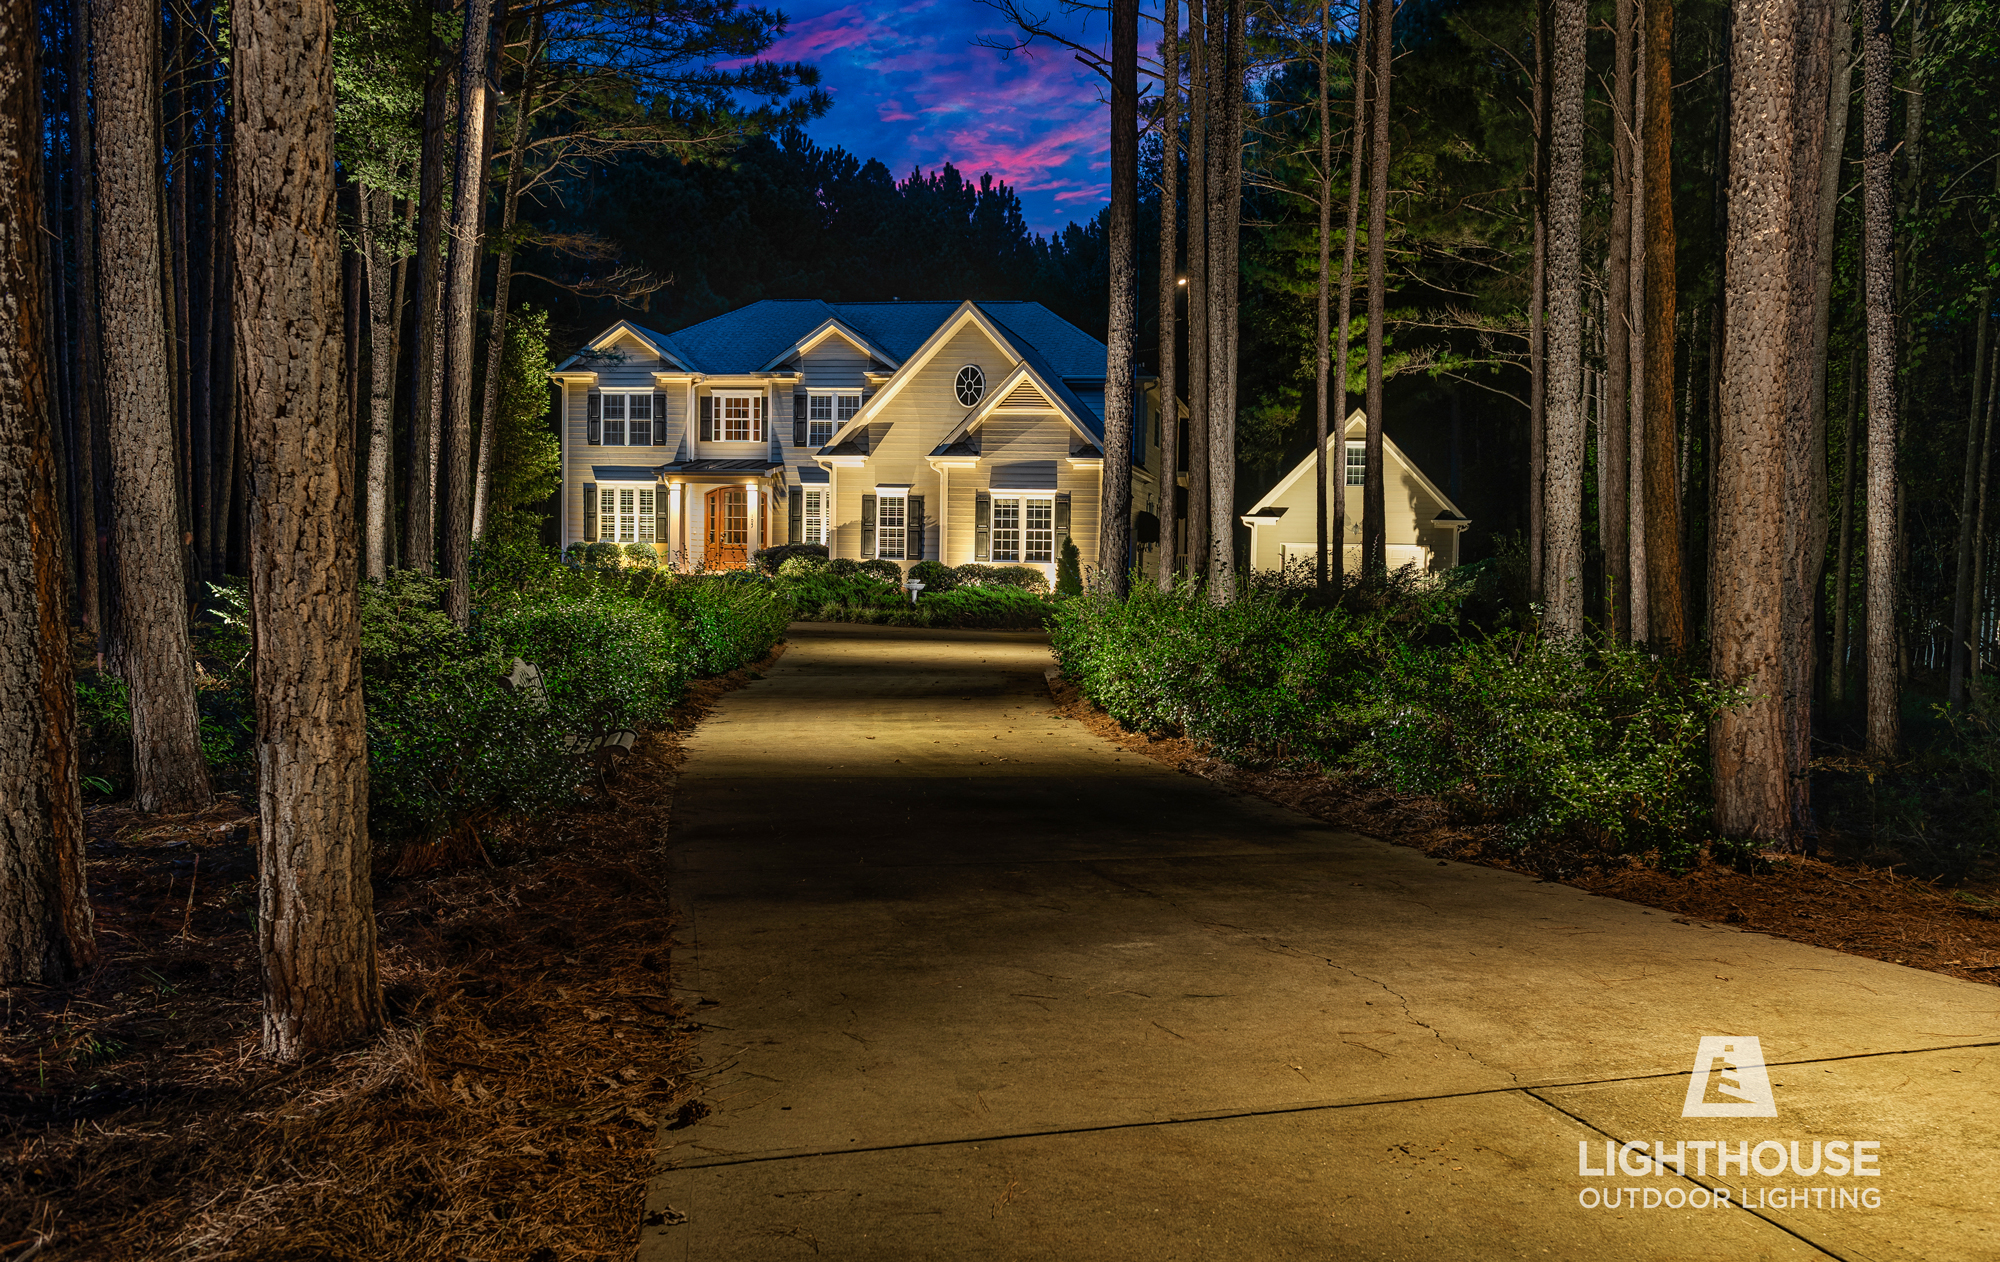 Driveway lighting in Commercial Point village, OH